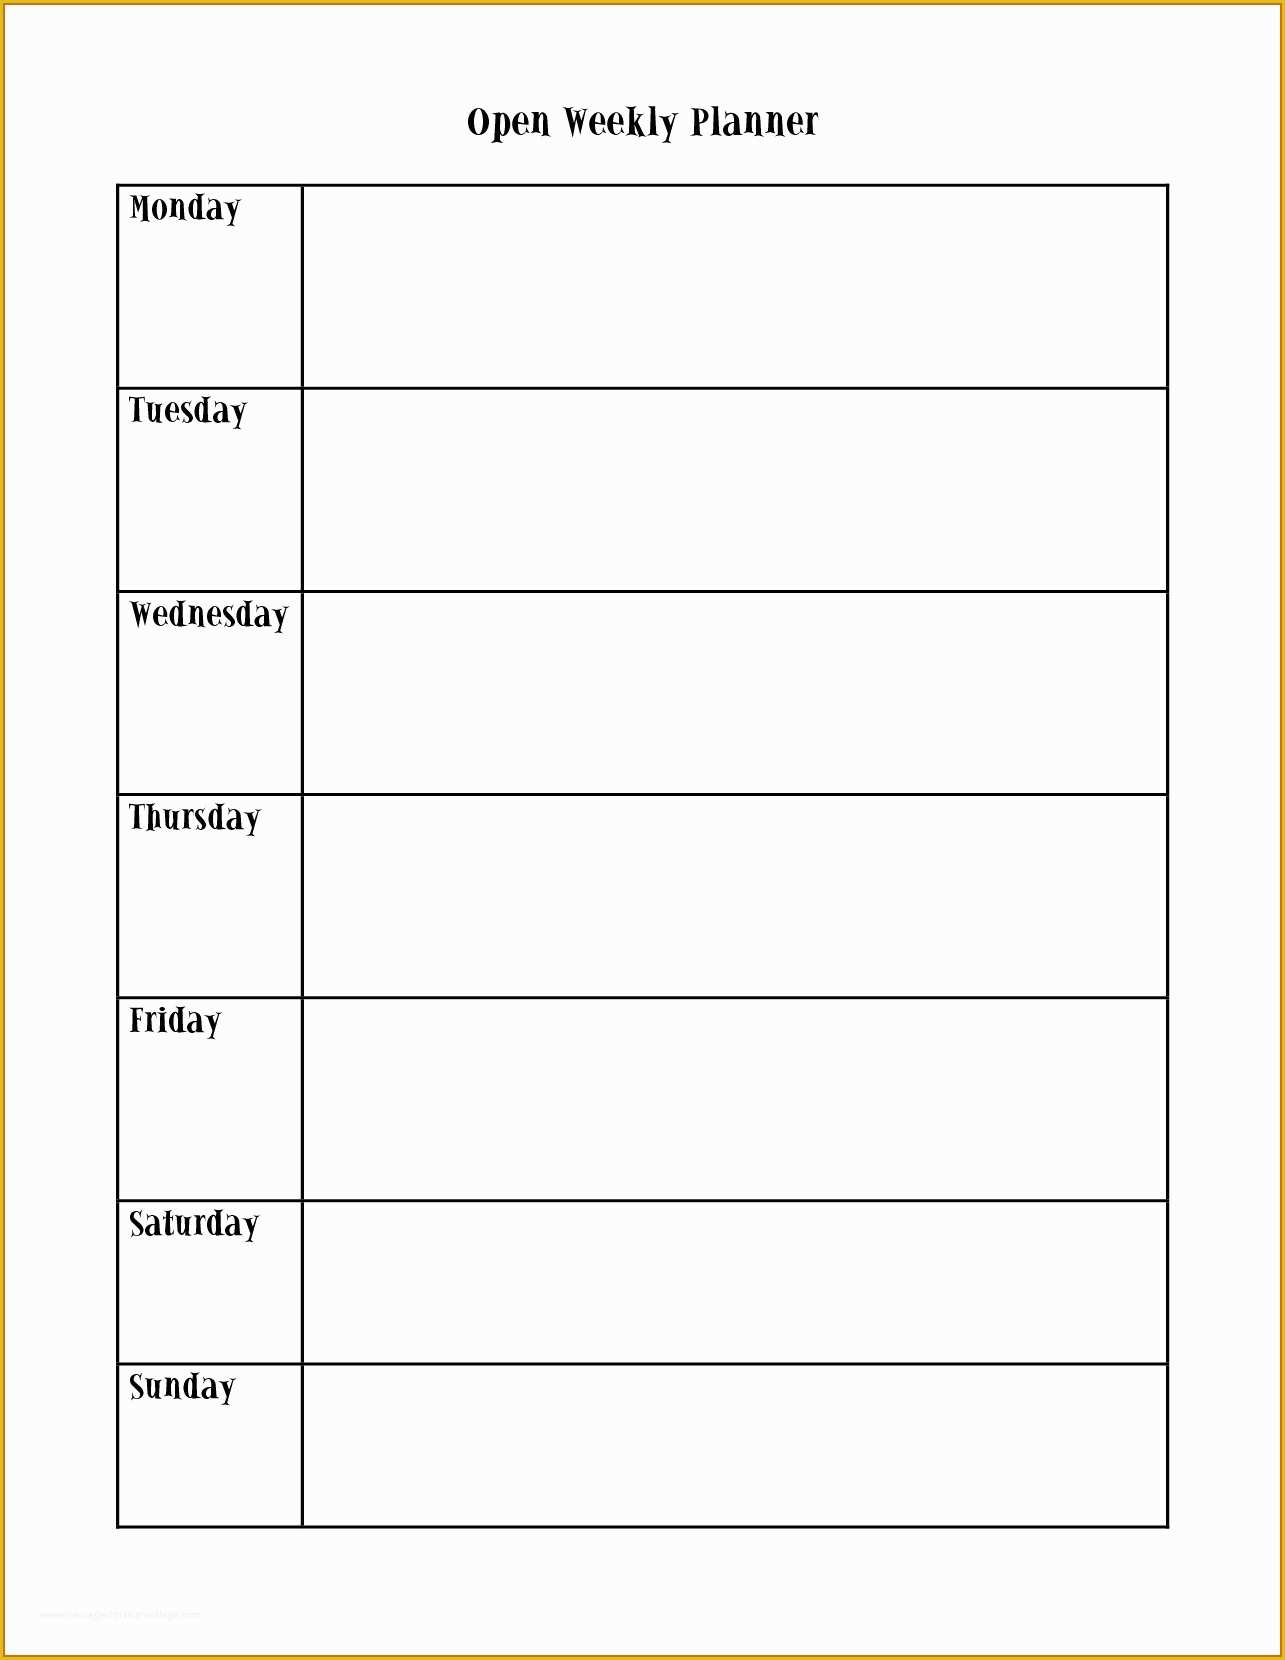 Free Monday Through Friday Calendar Template Of Monday Through Friday Calendar and Template Word 2018 with